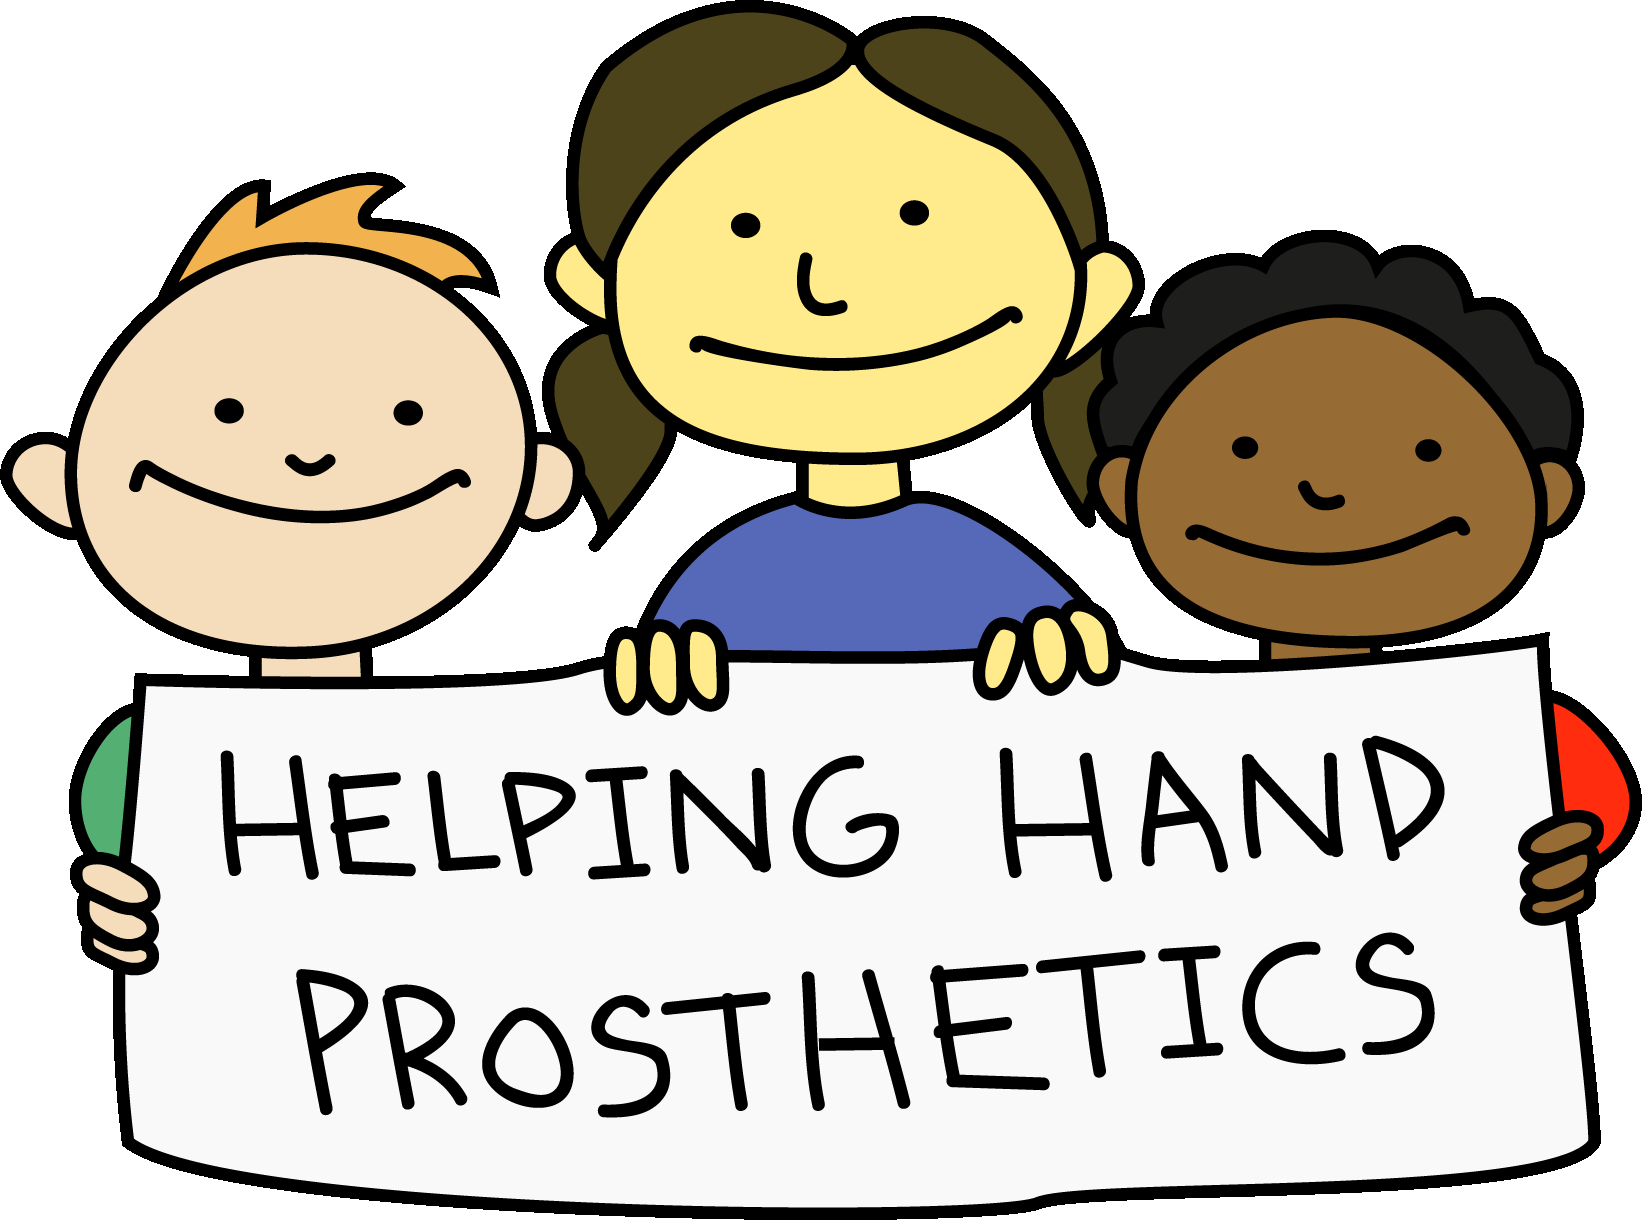 About Helping Hand Prosthetics